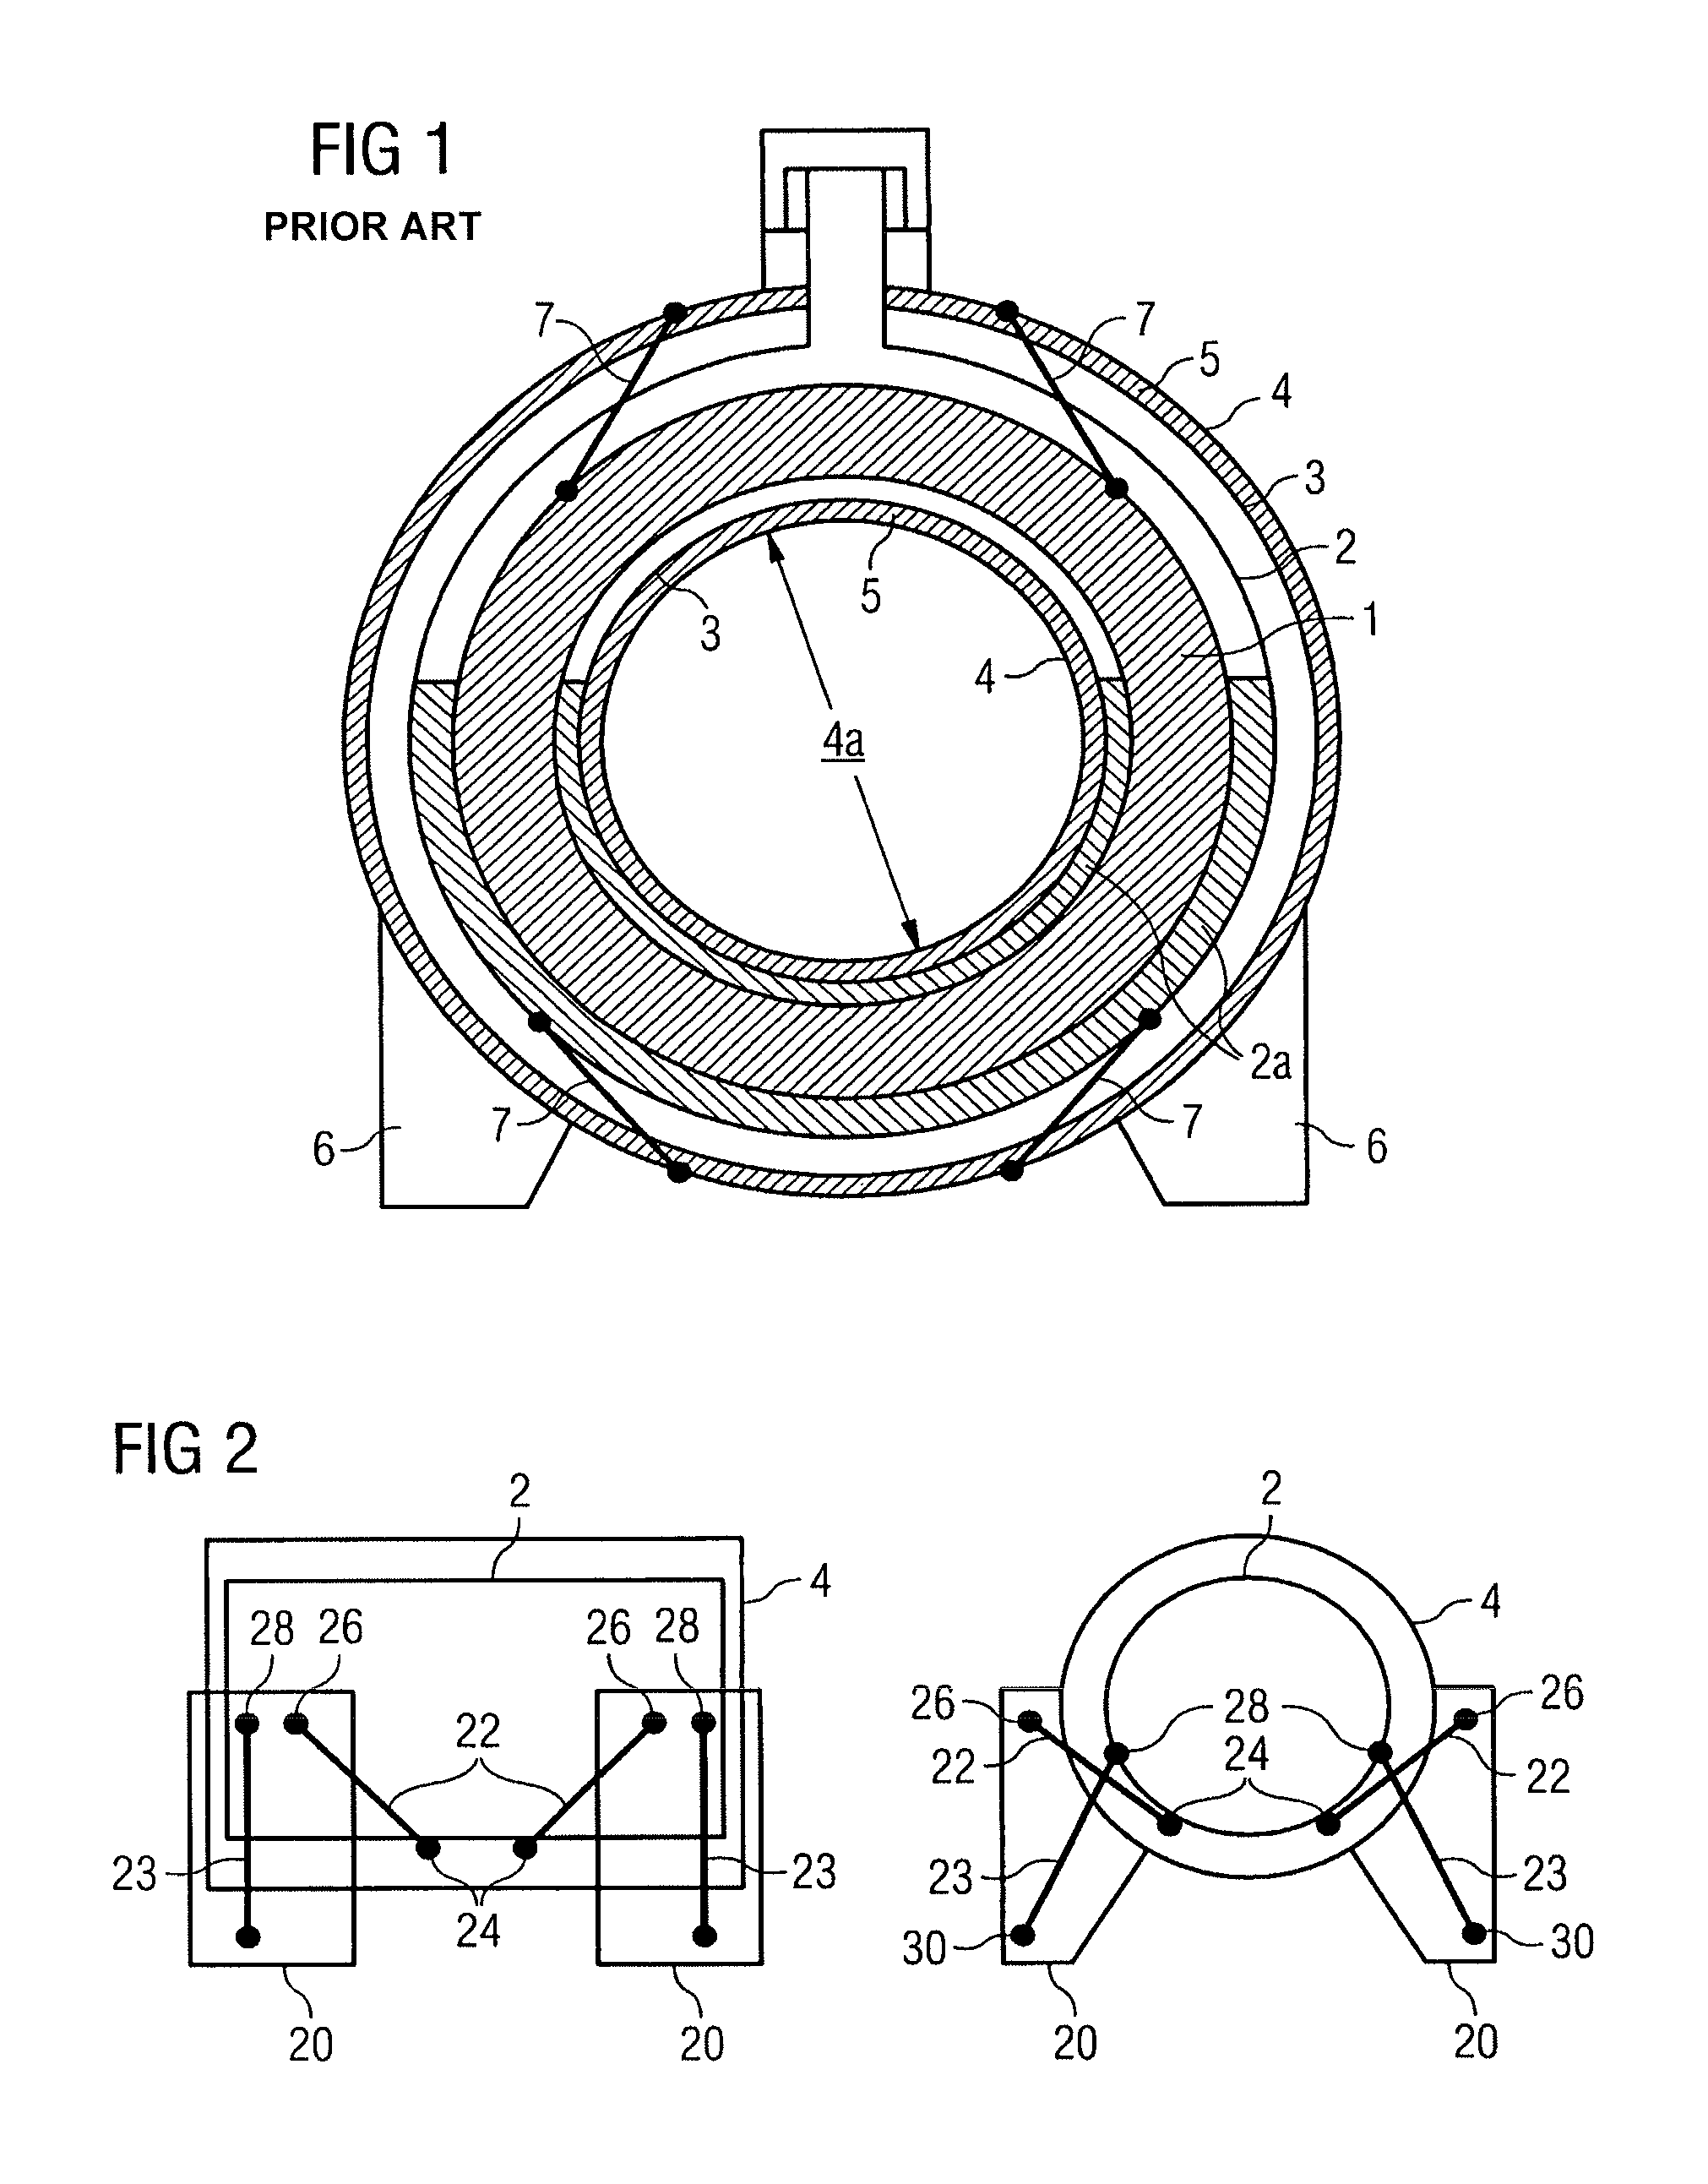 Cryostat comprising a cryogen vessel suspended within an outer vacuum container